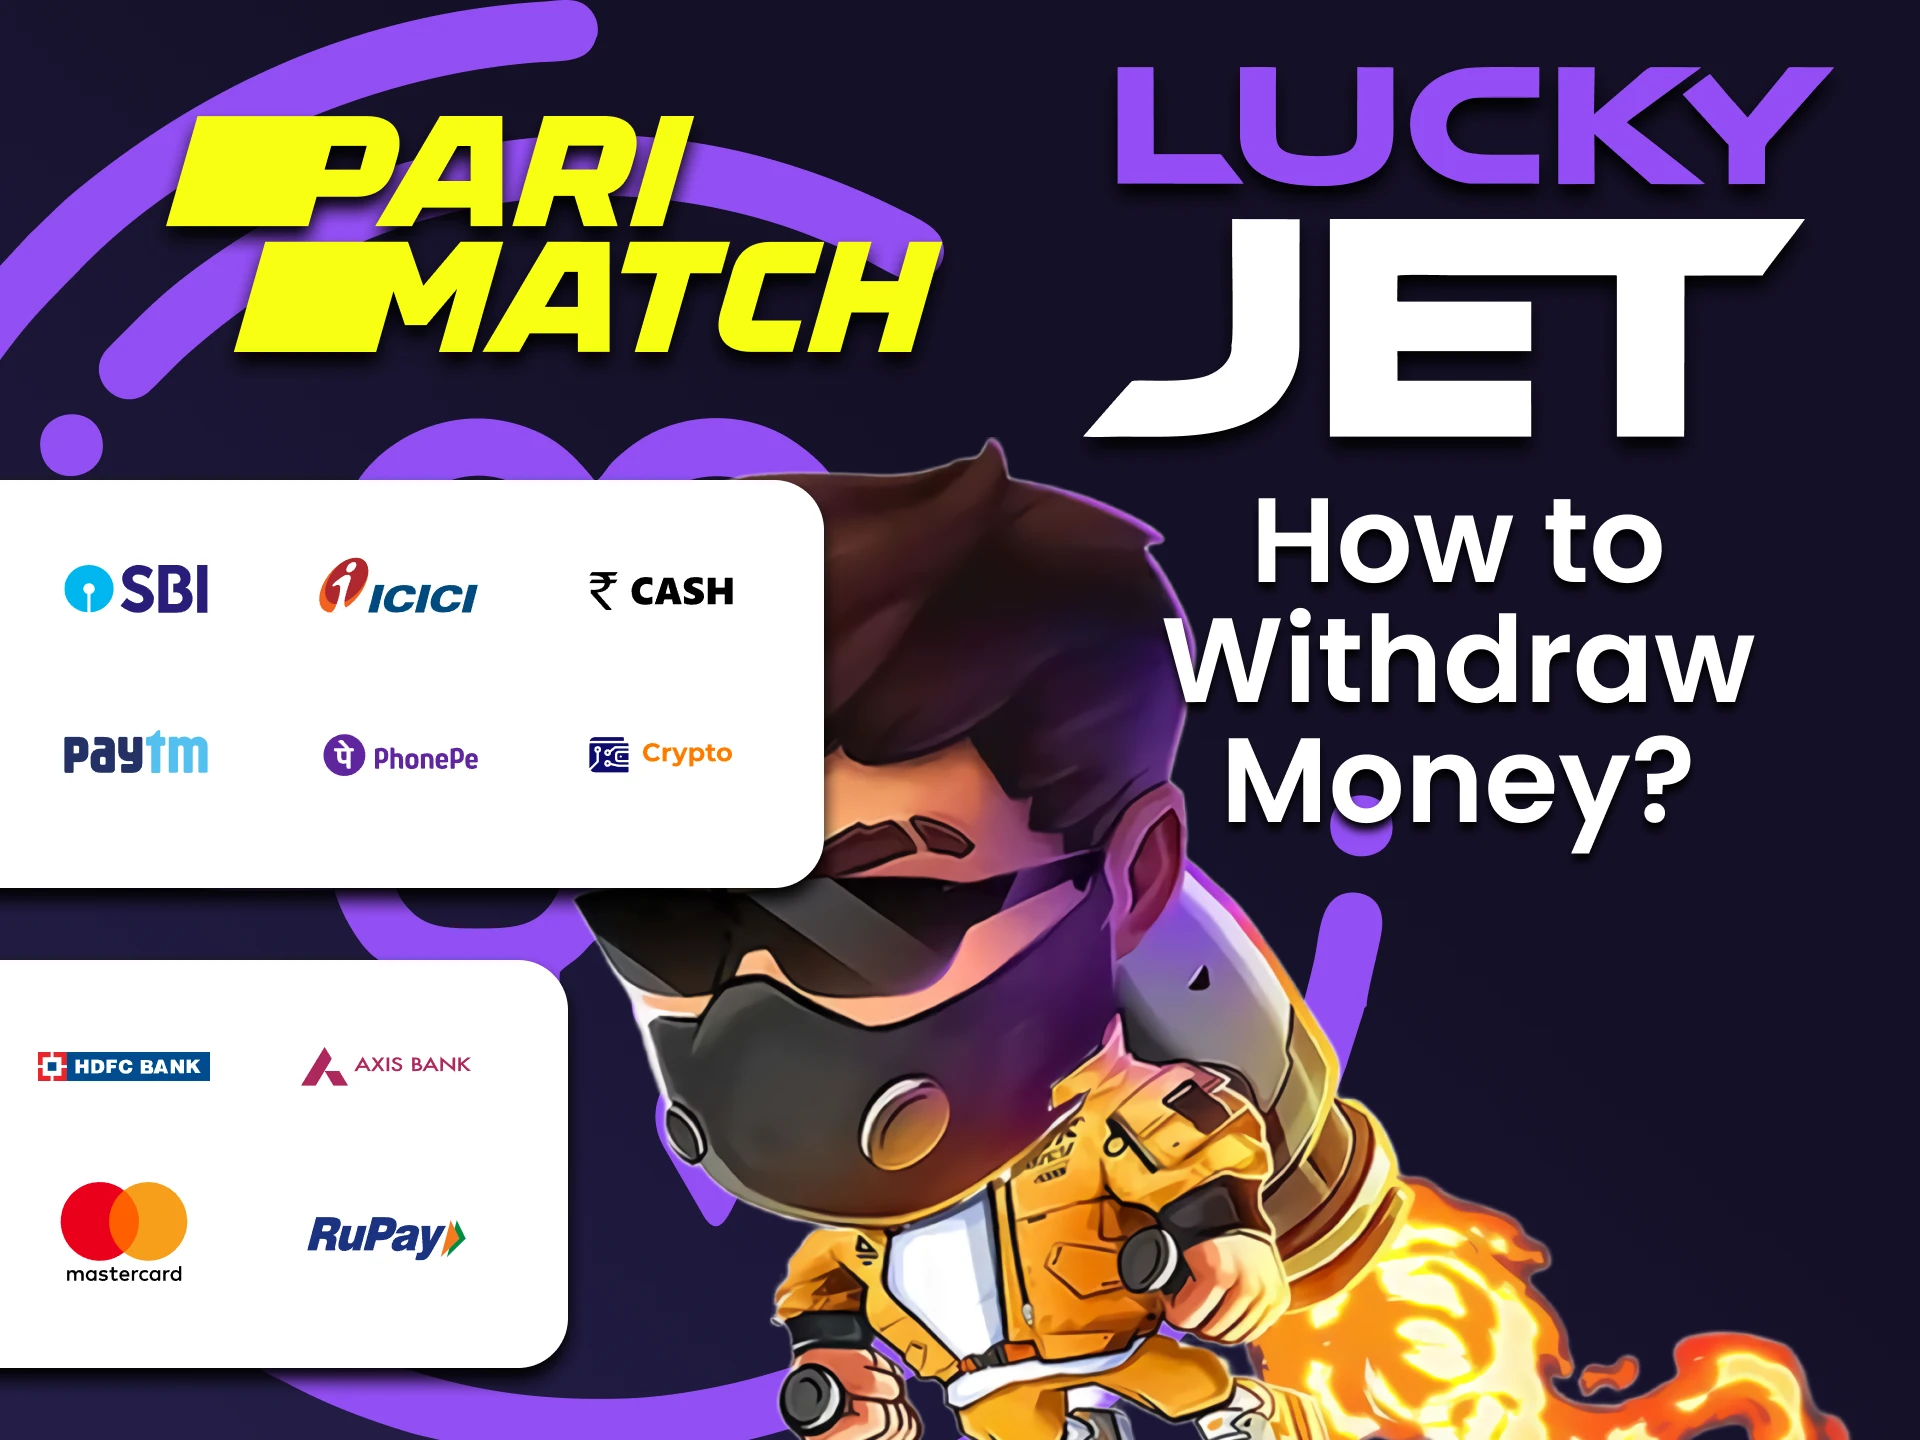 Find out how to withdraw funds for Lucky Jet on Parimatch.